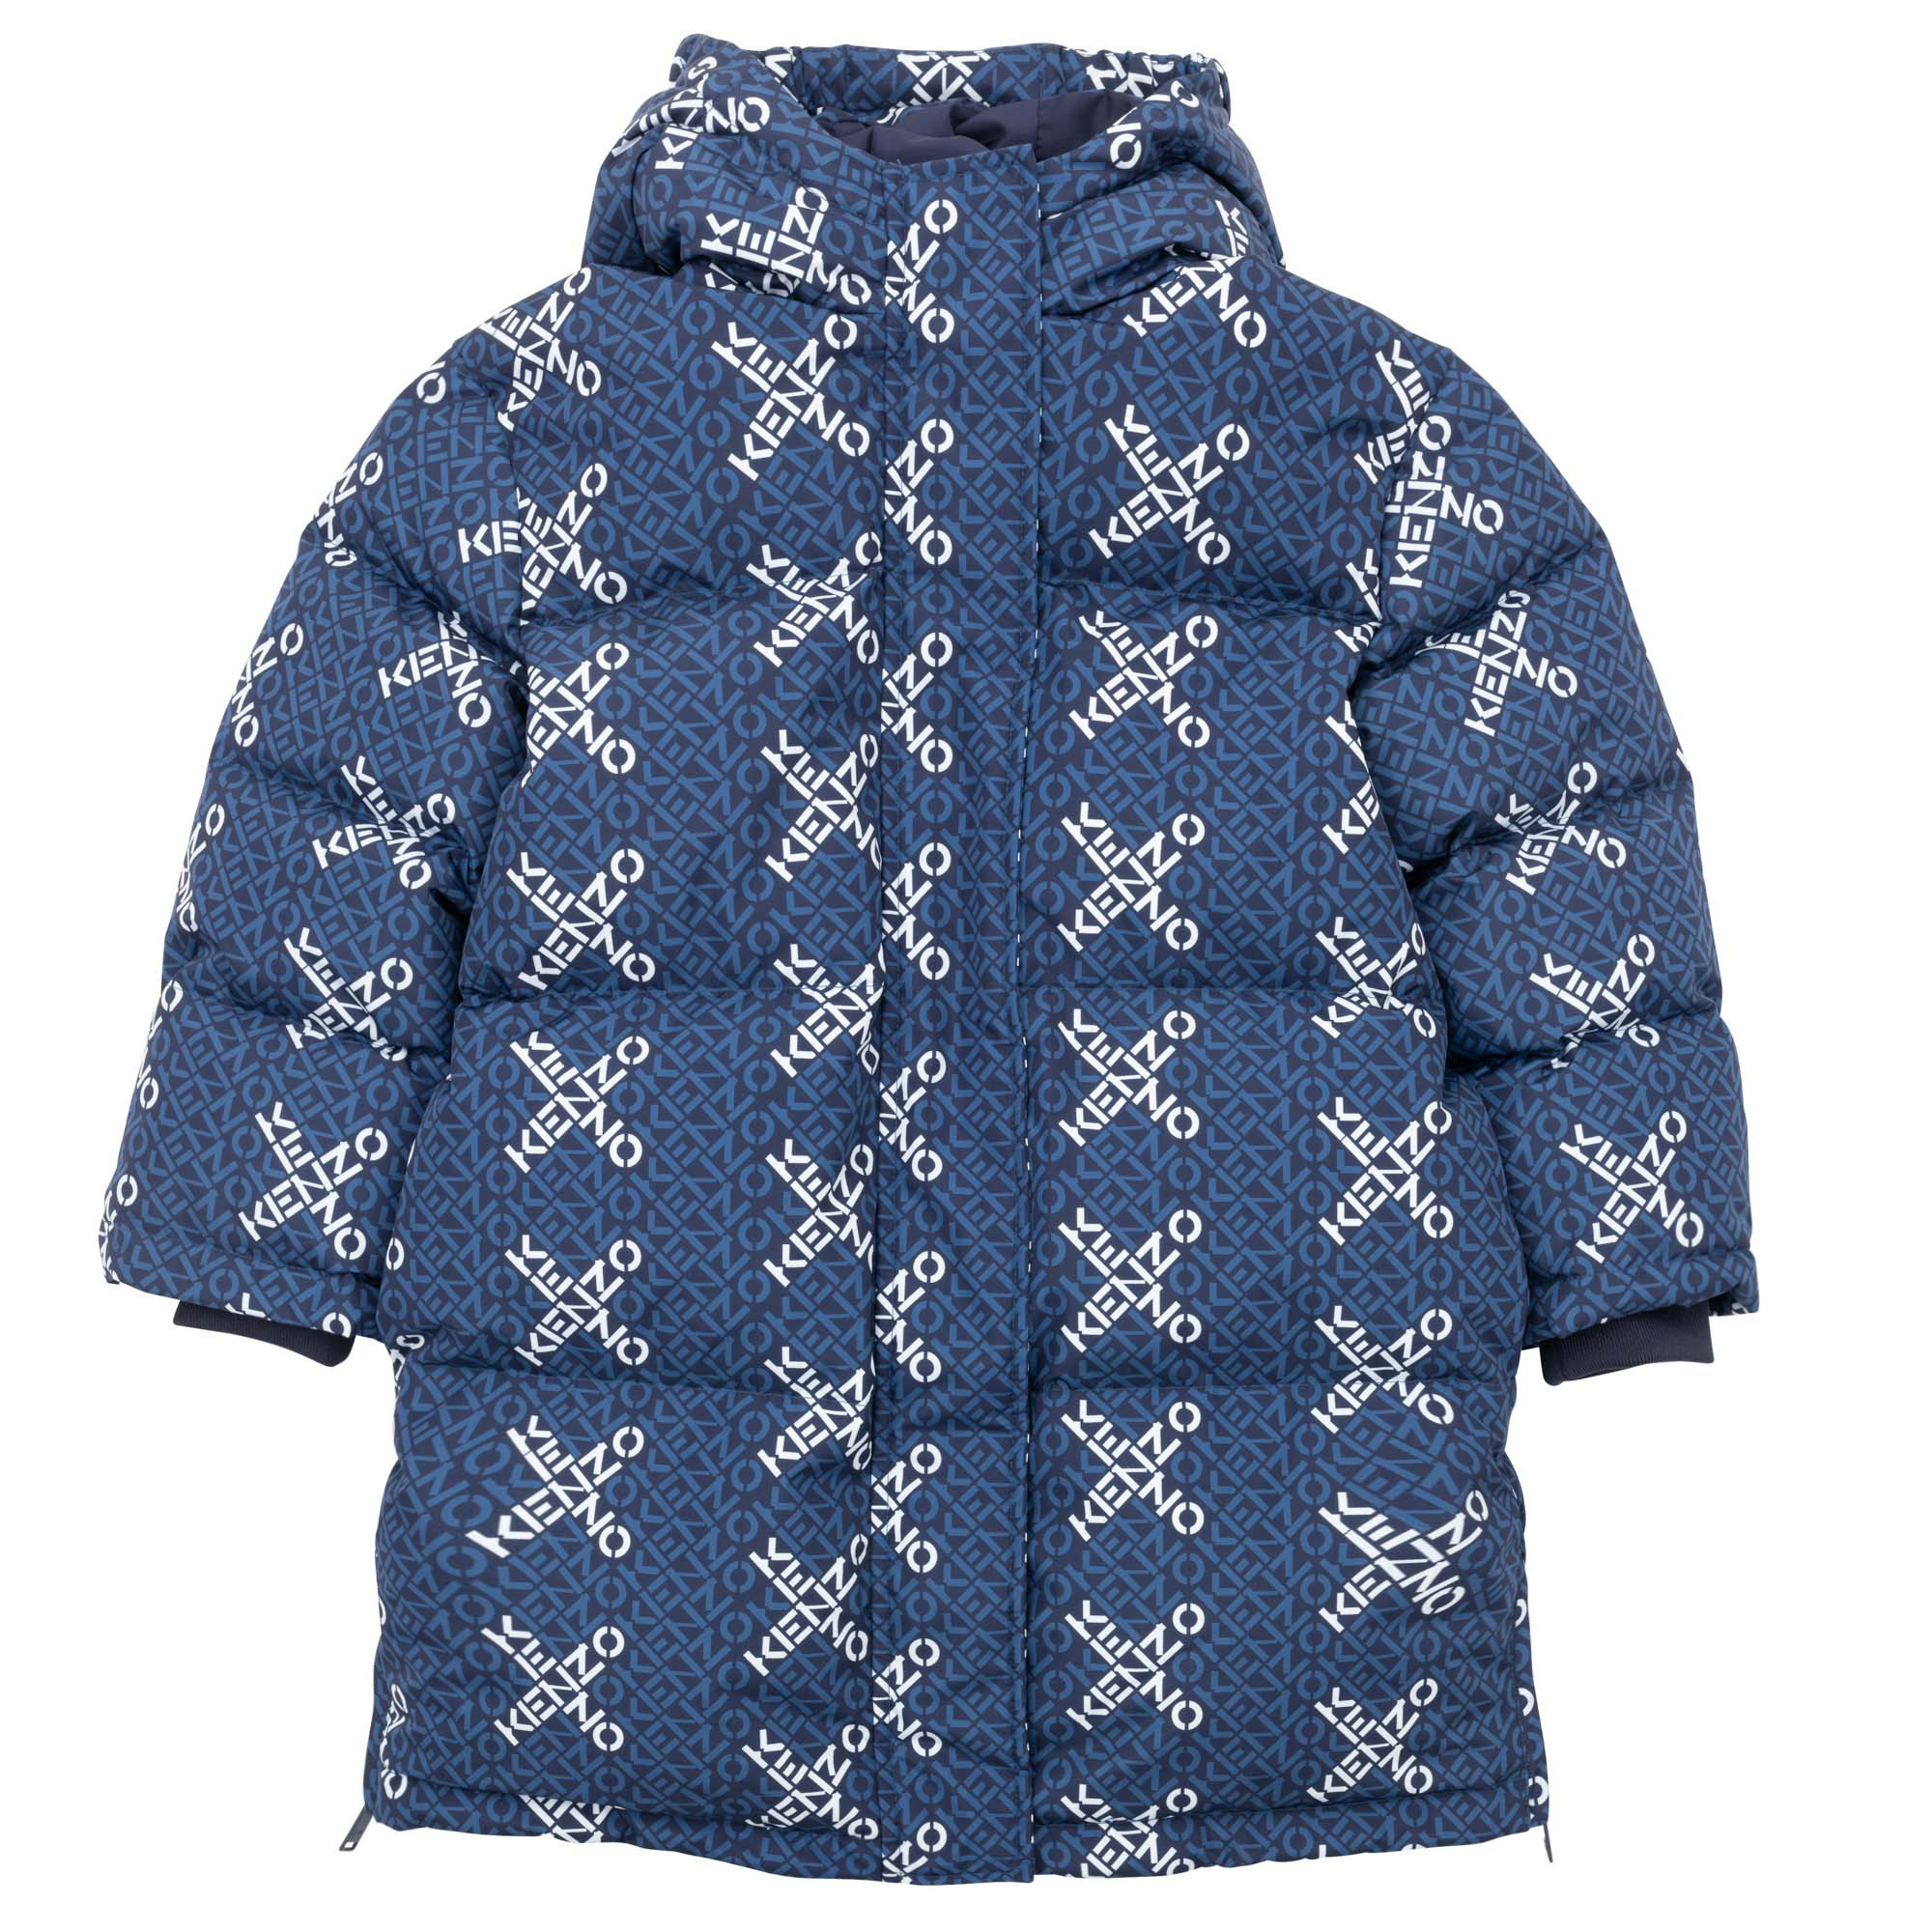 Signaal regeren spade Kenzo jas donkerblauw all over print - OLD SOUTH